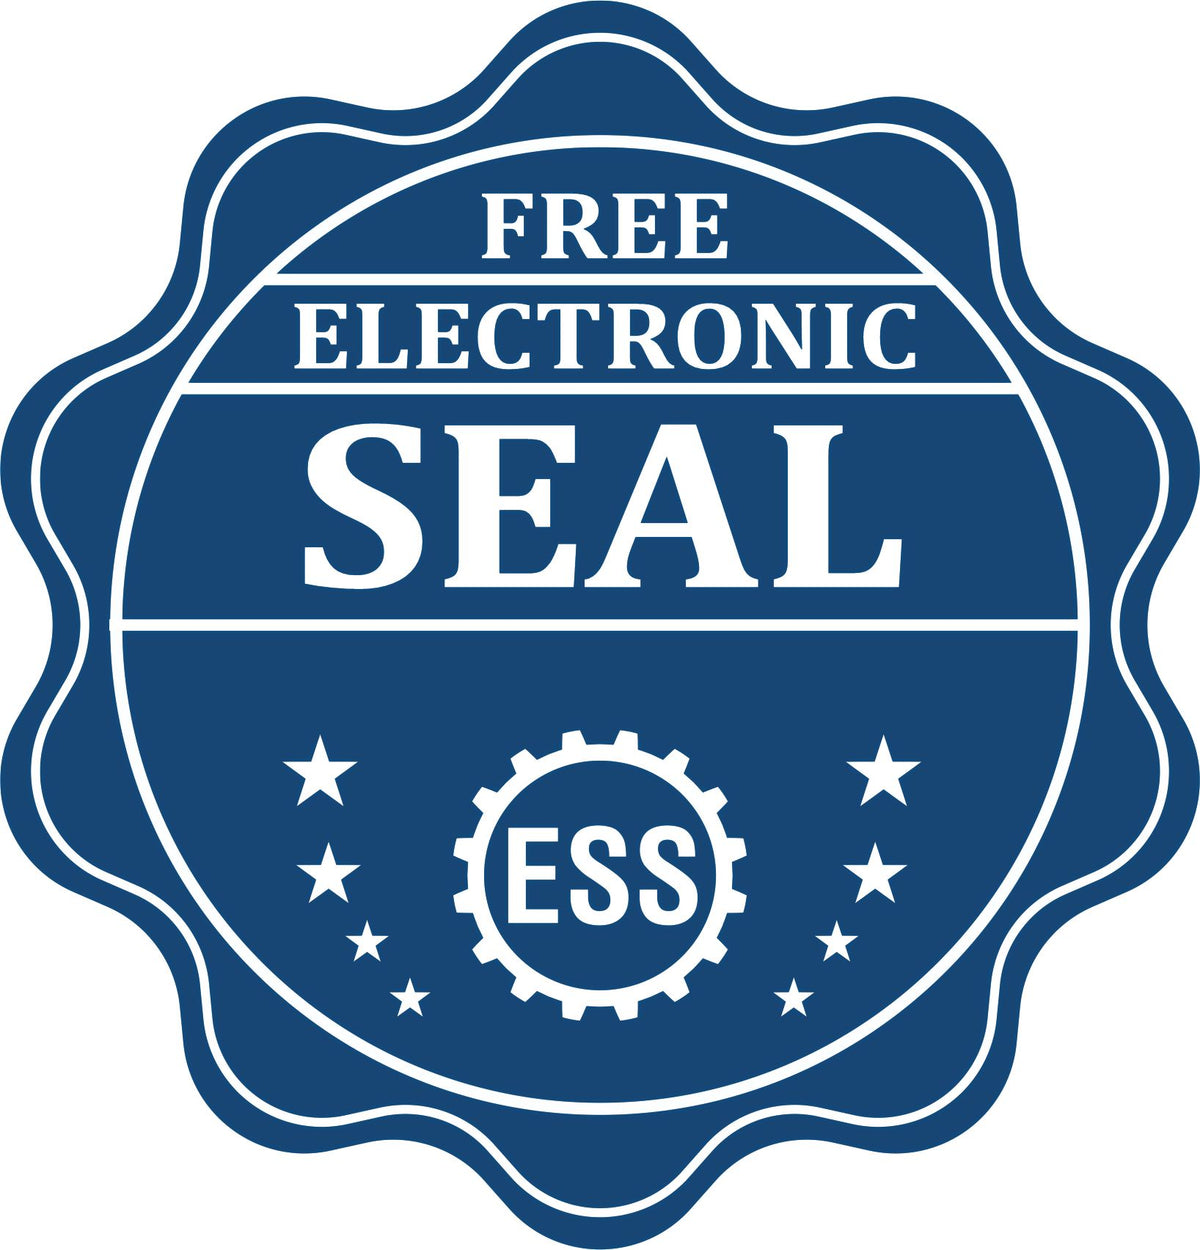 A badge showing a free electronic seal for the Handheld Alaska Land Surveyor Seal with stars and the ESS gear on the emblem.